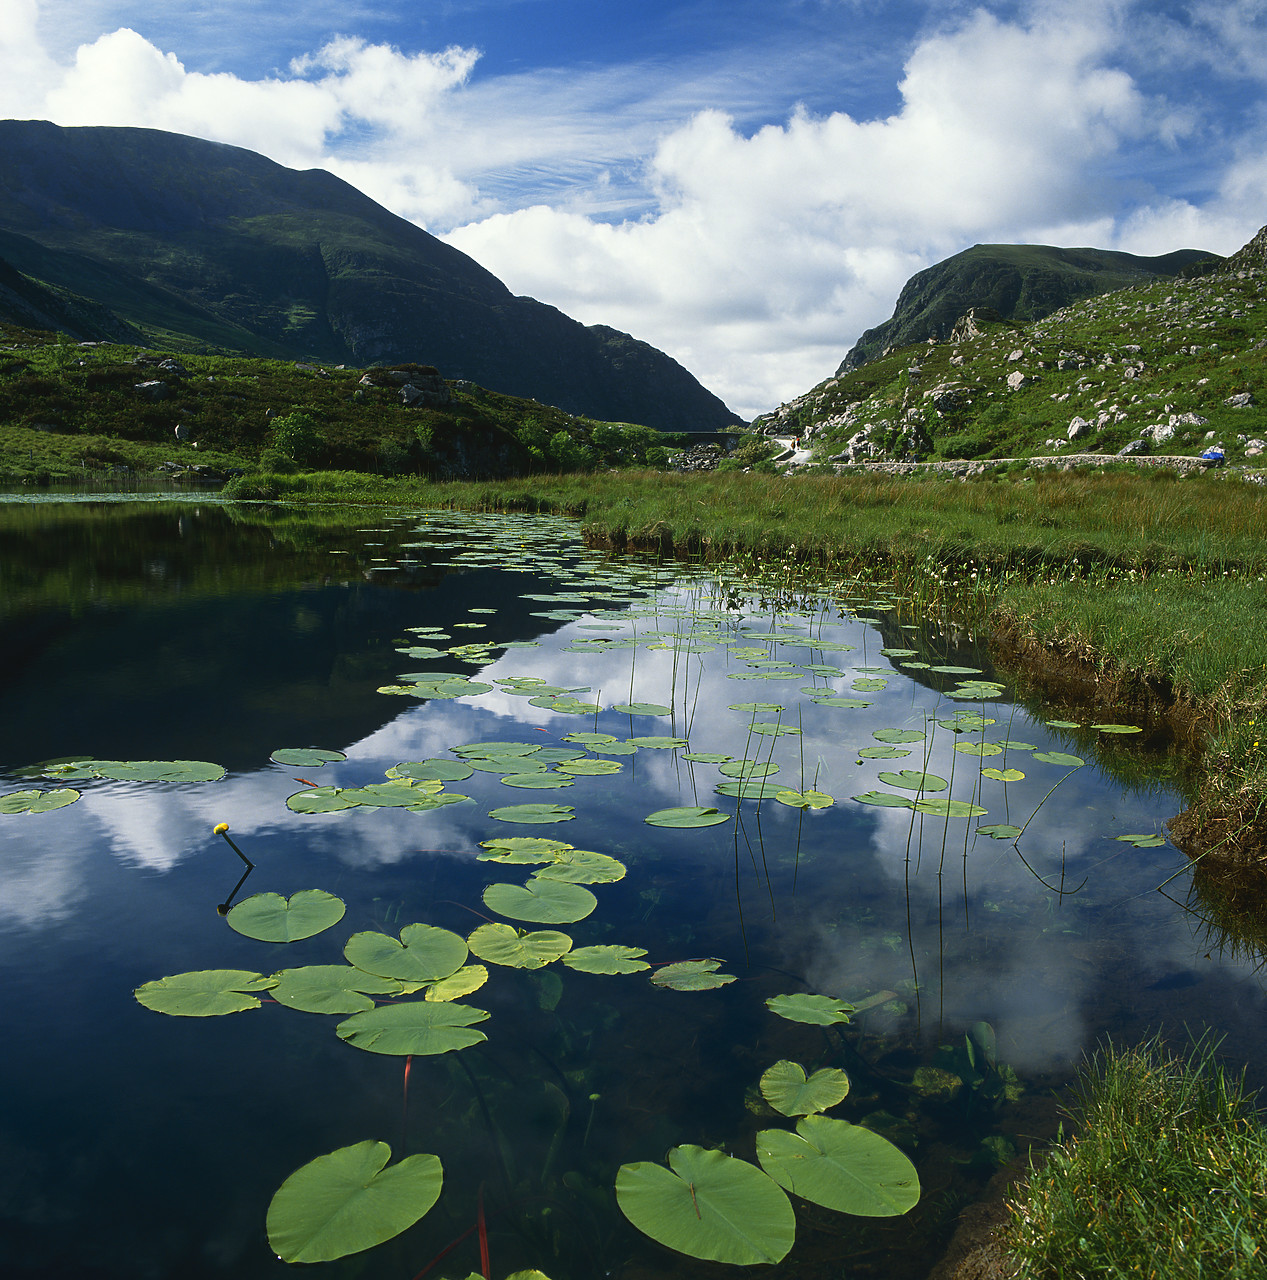 #902925-5 - Lily Pads in Lake, Gap of Dunloe, Co. Kerry, Ireland